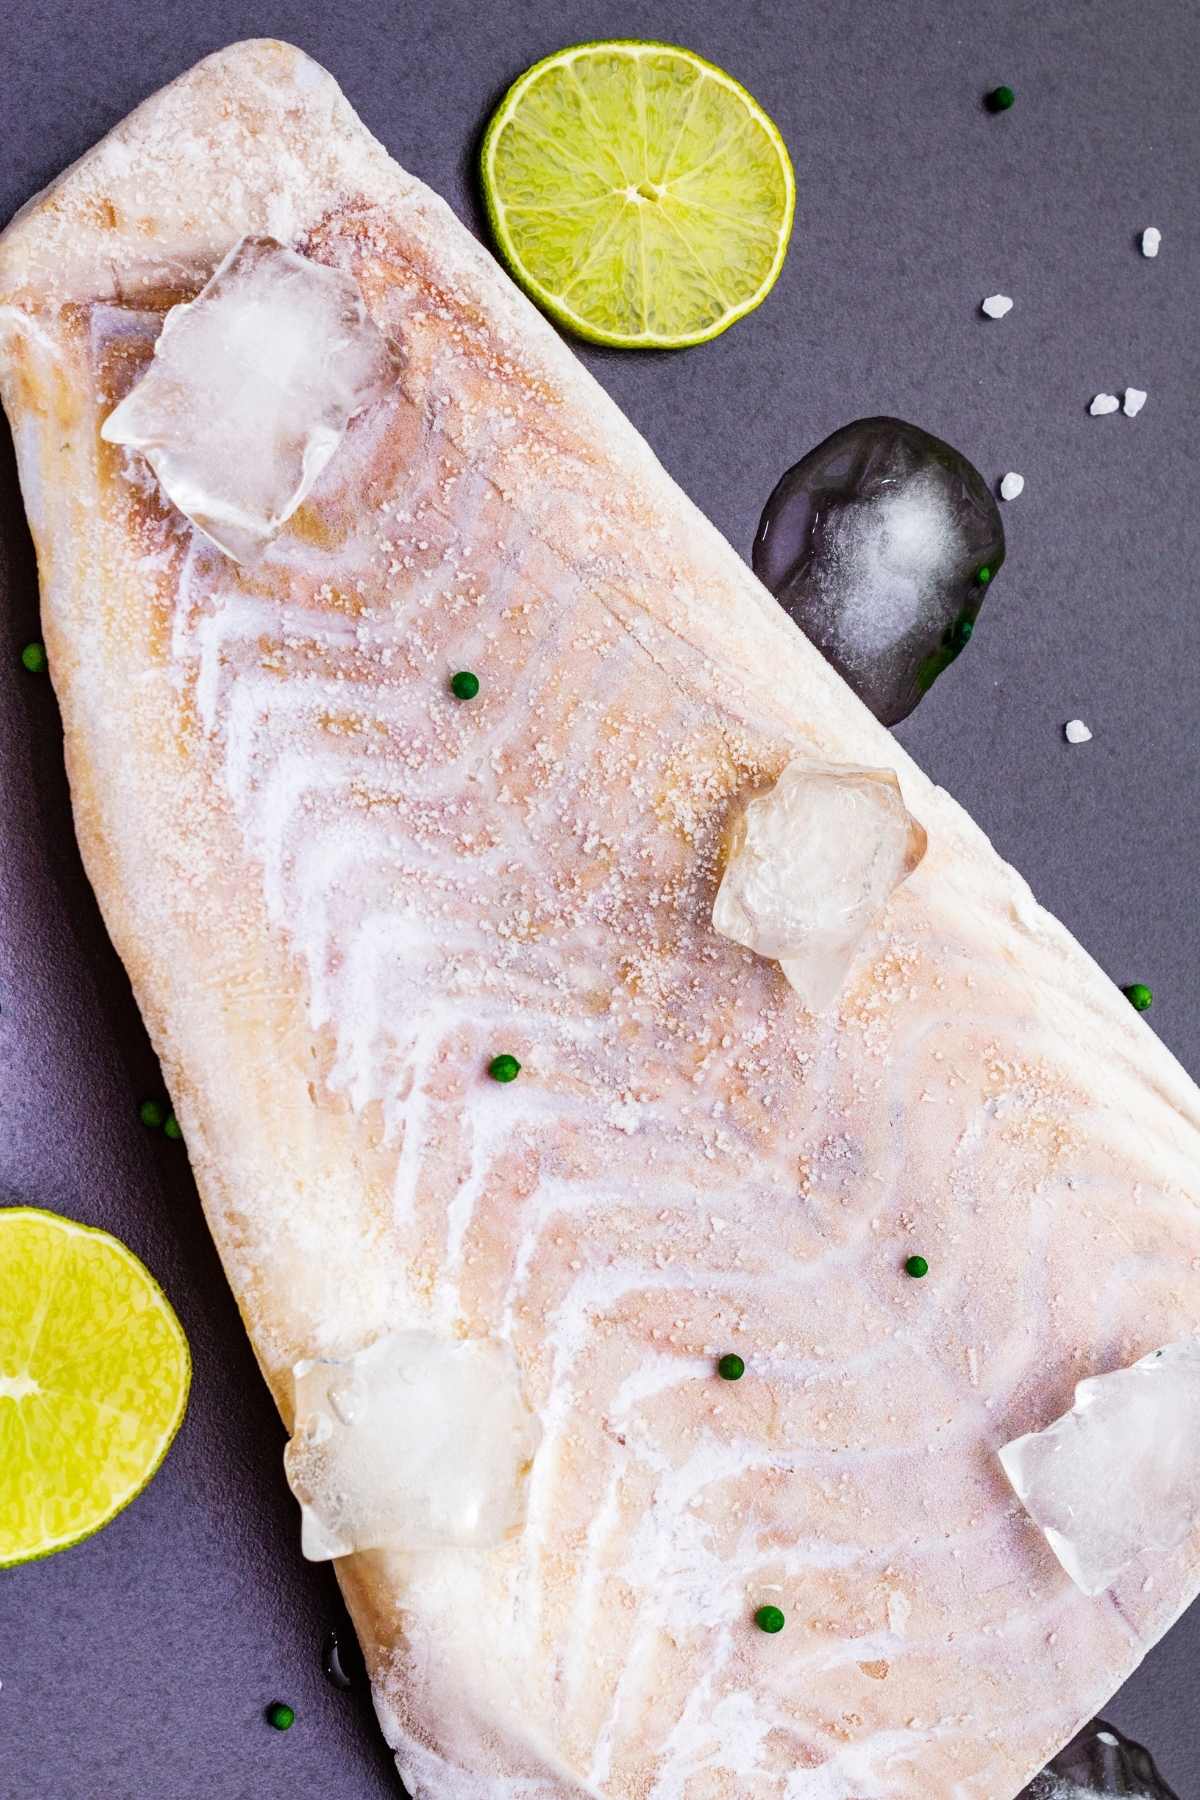 Pollock is a mild-tasting white fish that can be enjoyed in many dishes. It takes only a few minutes to prepare, and is easy to fry, bake or roast. It is also high in protein and low in fat.